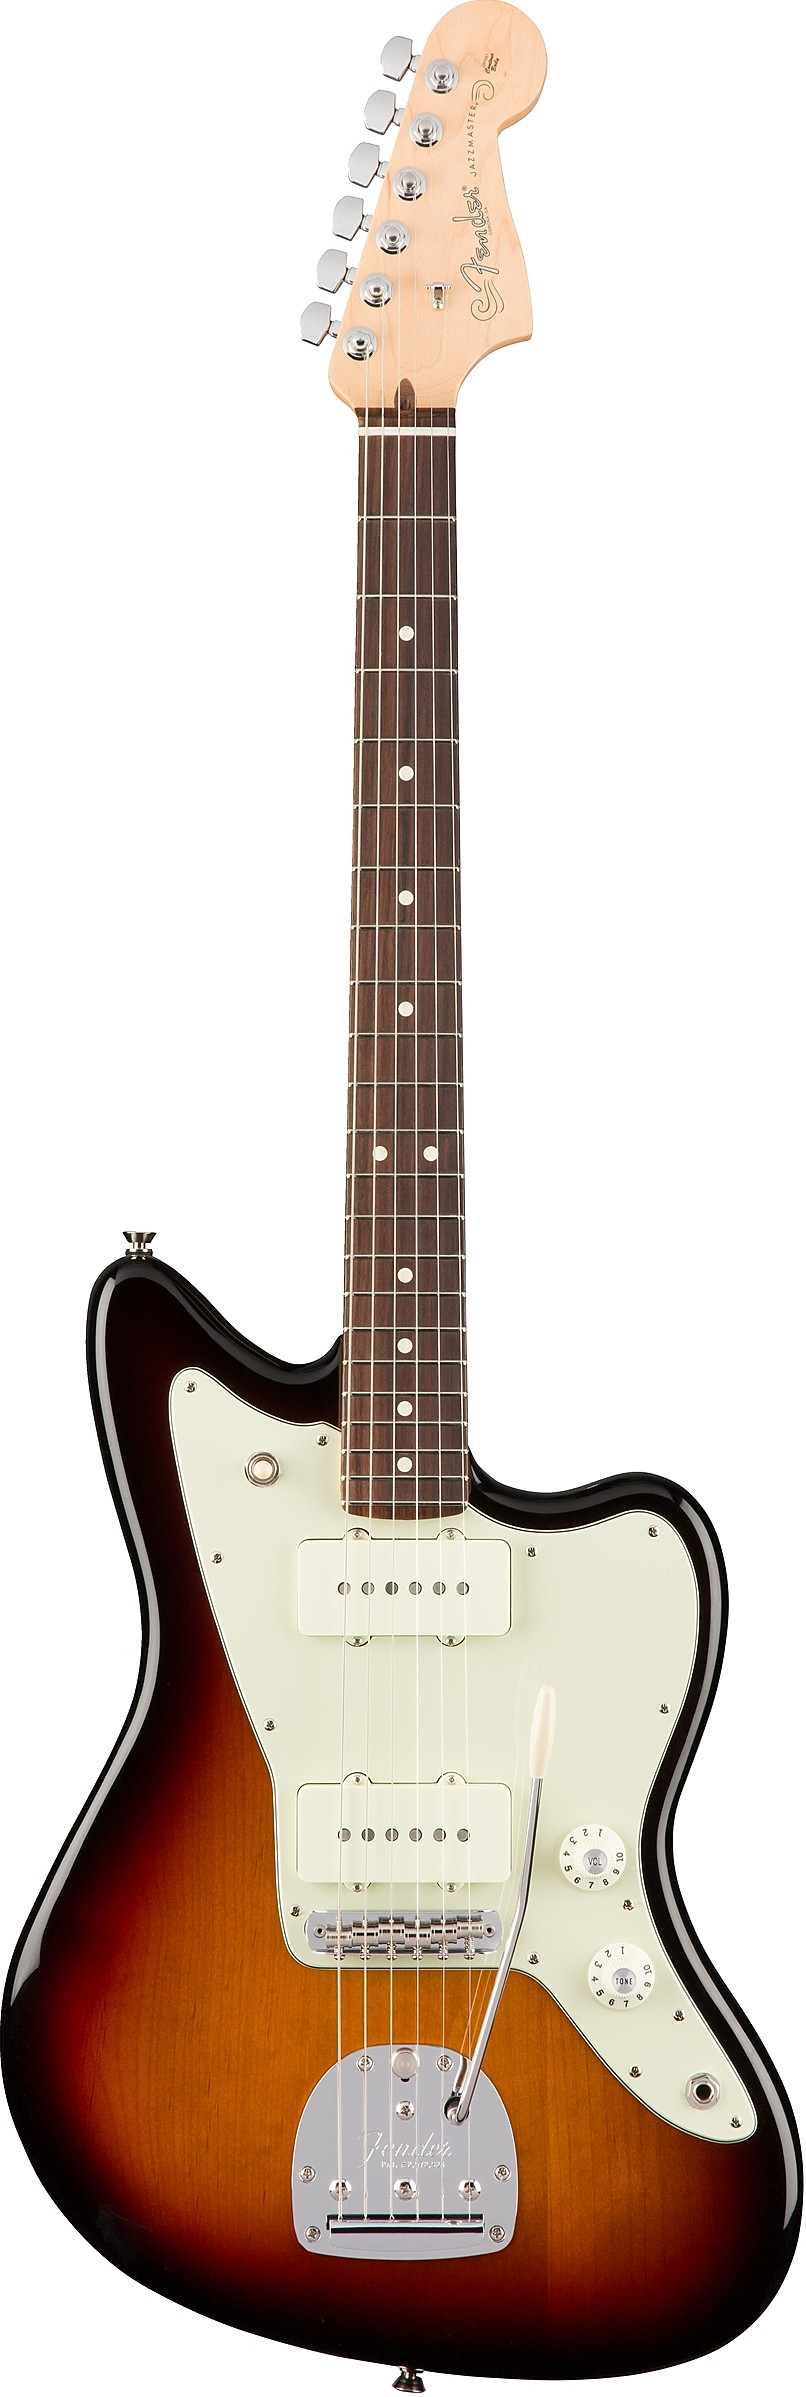 American Professional Jazzmaster by Fender